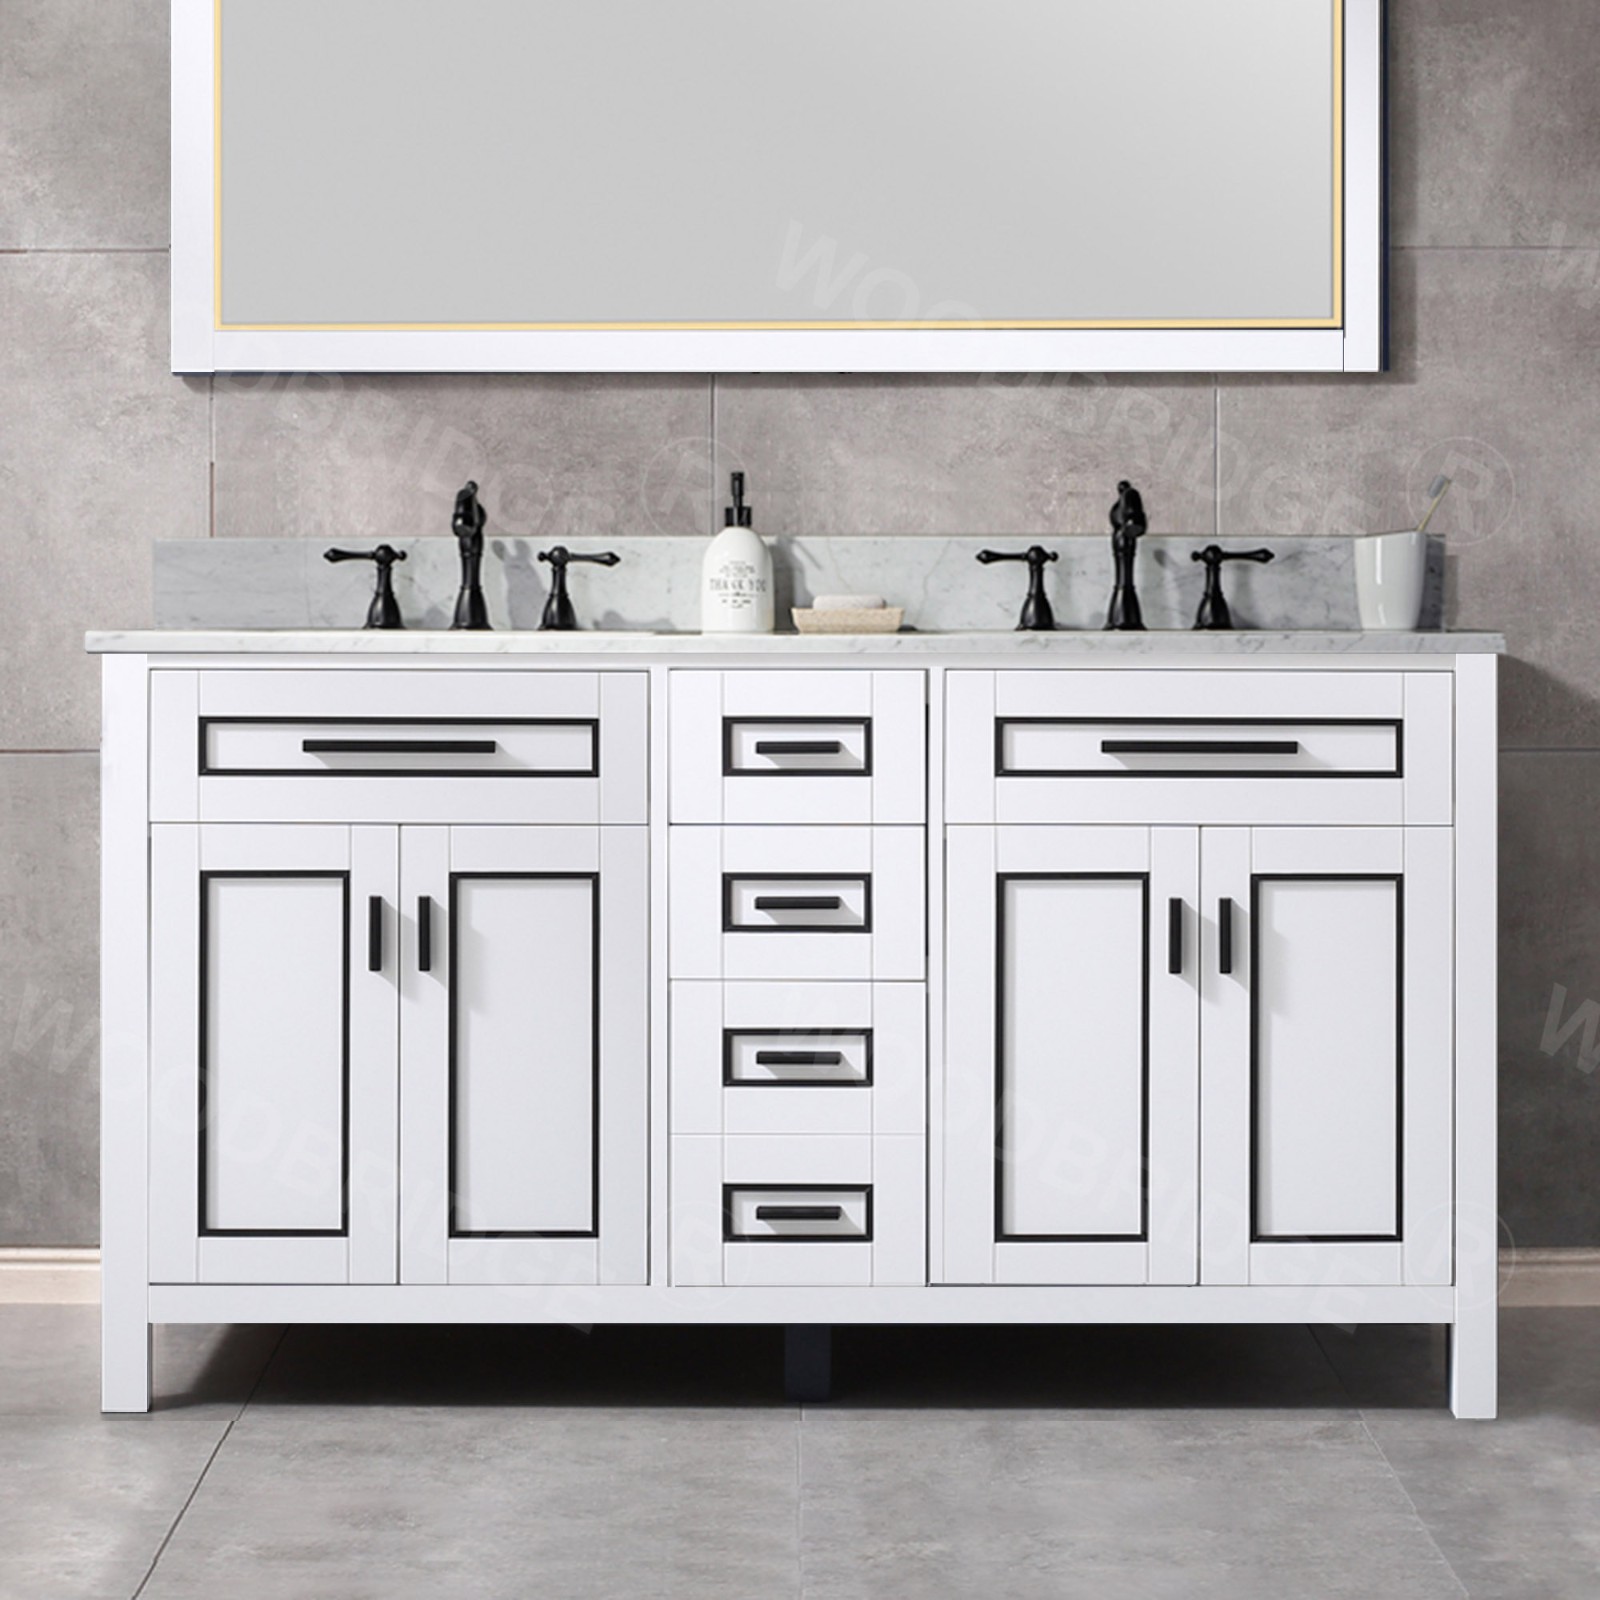  WOODBRIDGE Milan  61” Floor Mounted Single Basin Vanity Set with Solid Wood Cabinet in White, and Carrara White Marble Vanity Top with Pre-installed Undermount Rectangle Bathroom Sink in White, Pre-Drilled 3-Hole for 4-inch Centerset Faucet_4615